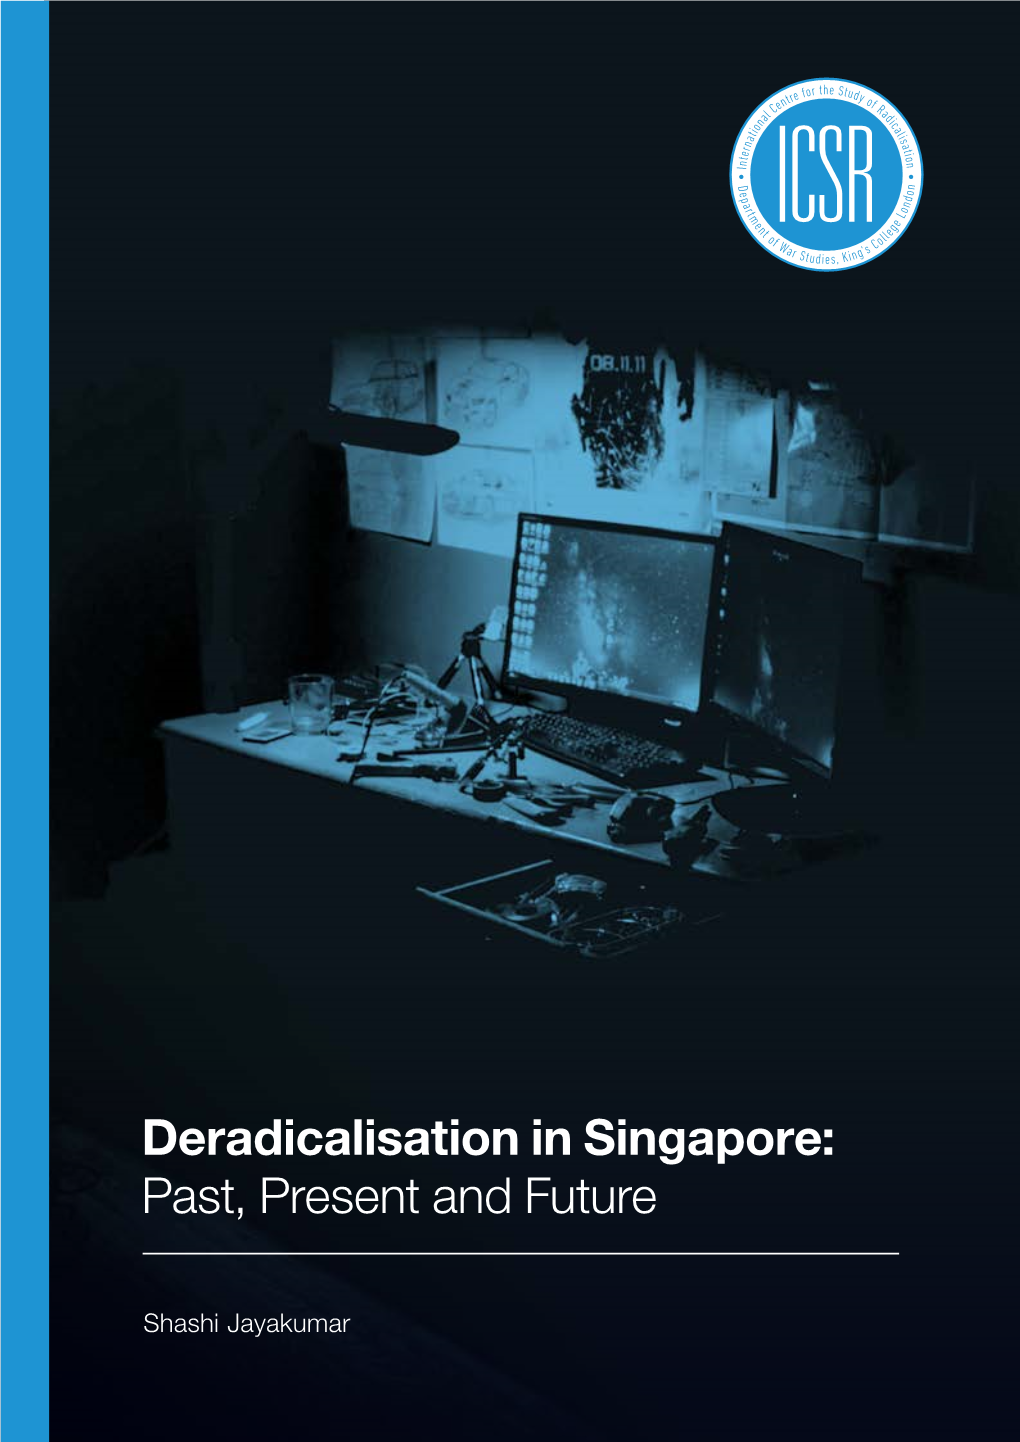 Deradicalisation in Singapore: Past, Present and Future